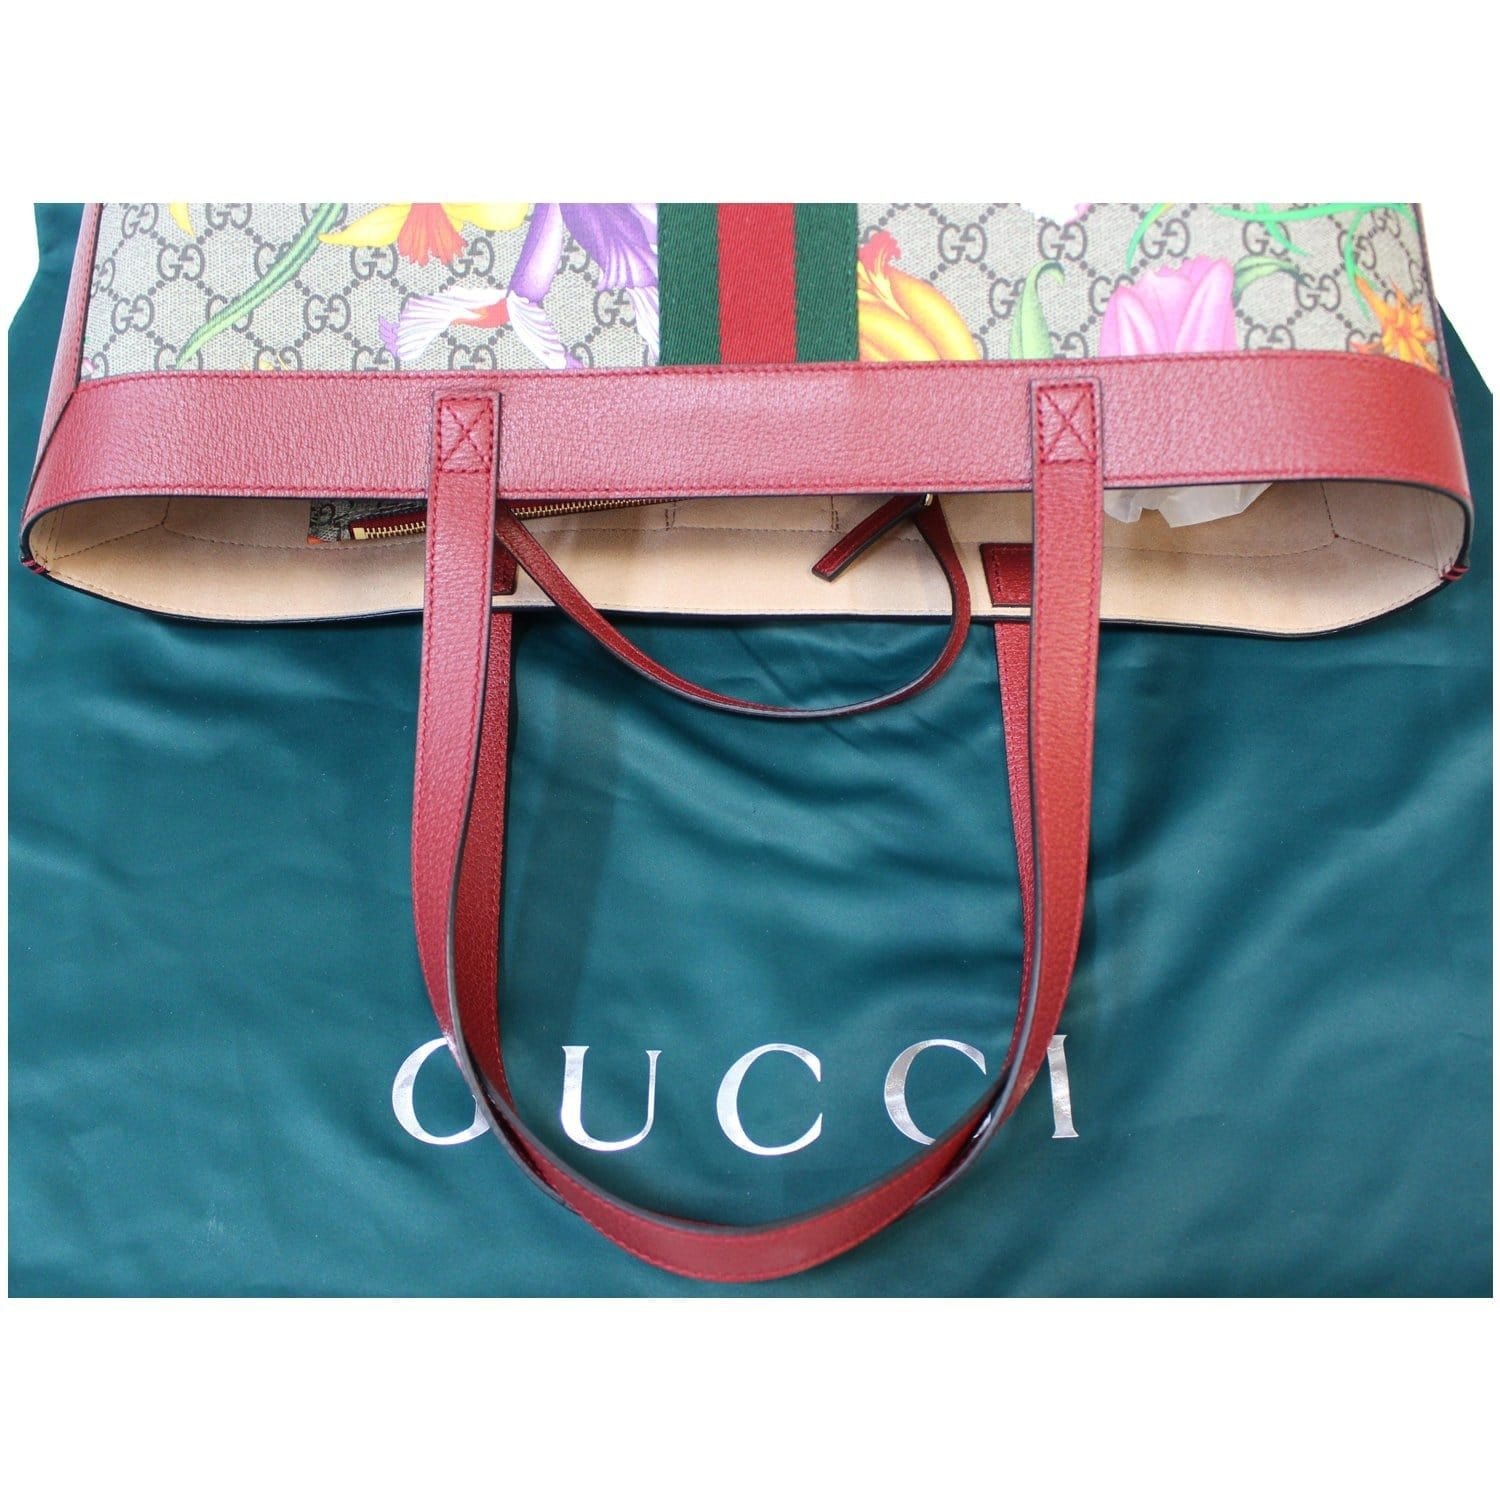 GUCCI Ophidia GG Flora Medium Tote Bag Red 547947-US